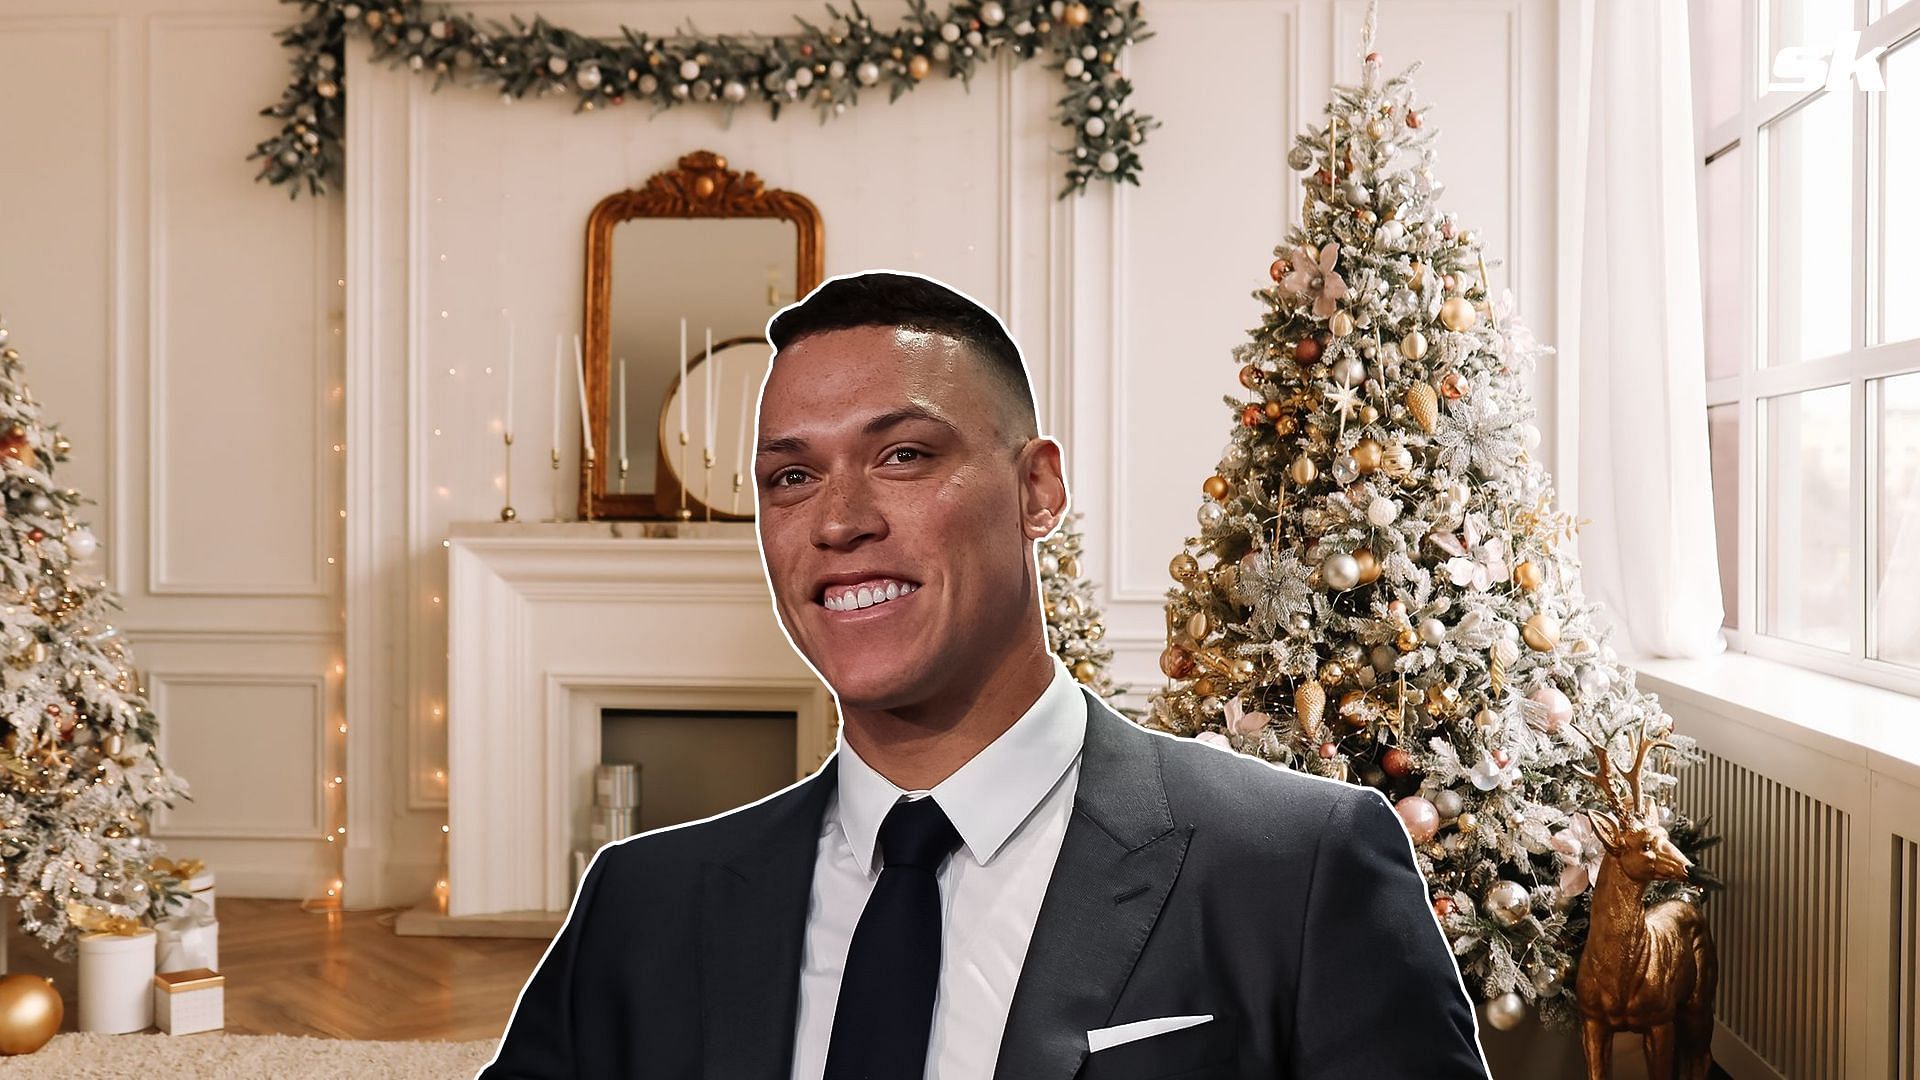 Aaron Judge stopped by a well-known NYC barbershop to spread some holiday cheer